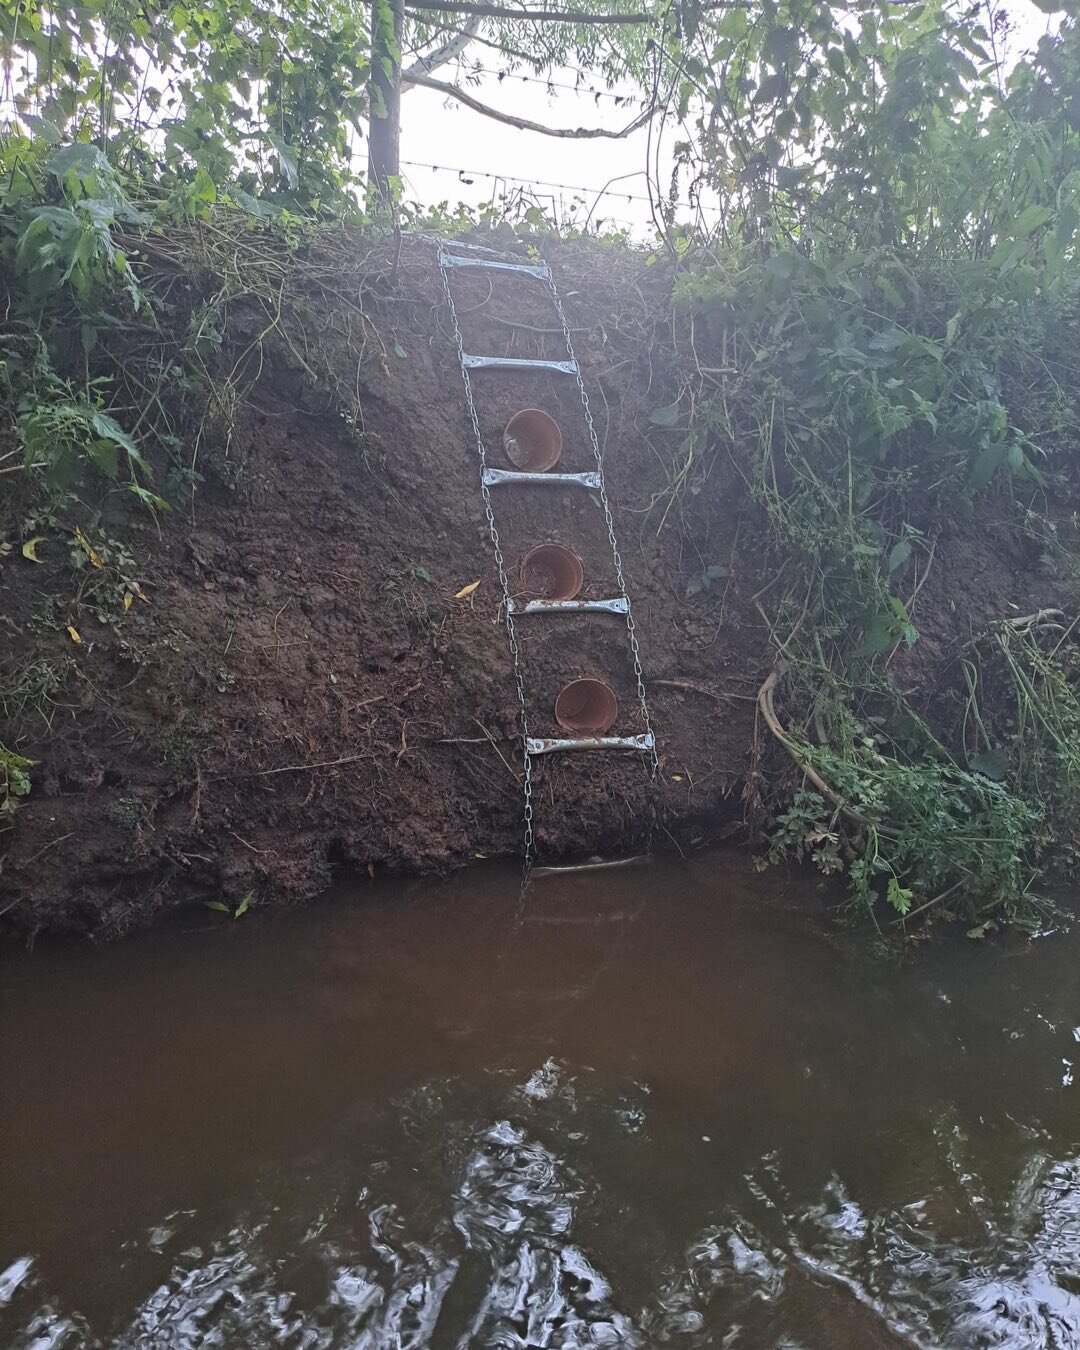 Ingenious work by our member Barry Townsend to improve river access at Upleadon. #riverleadon #gac #anglingimprovements